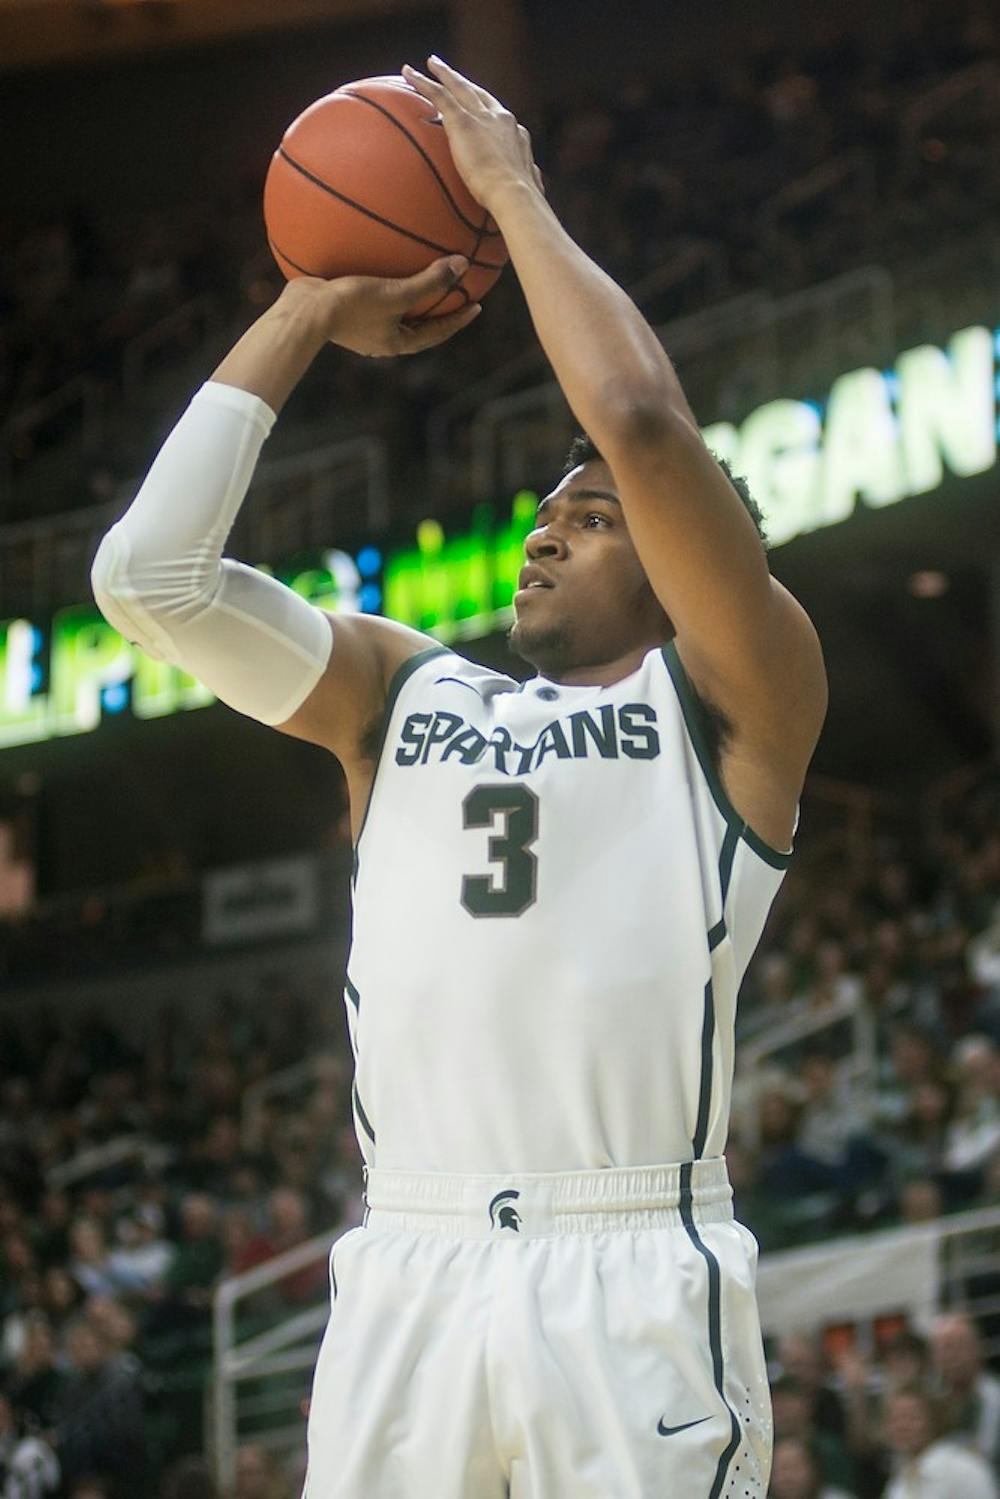 <p>Sophomore guard Alvin Ellis lll attmpts a point Dec. 14, 2014, during a game against Oakland at Breslin Center. The Spartans defeated the Golden Grizzlies, 87-61. Erin Hampton/The State News</p>